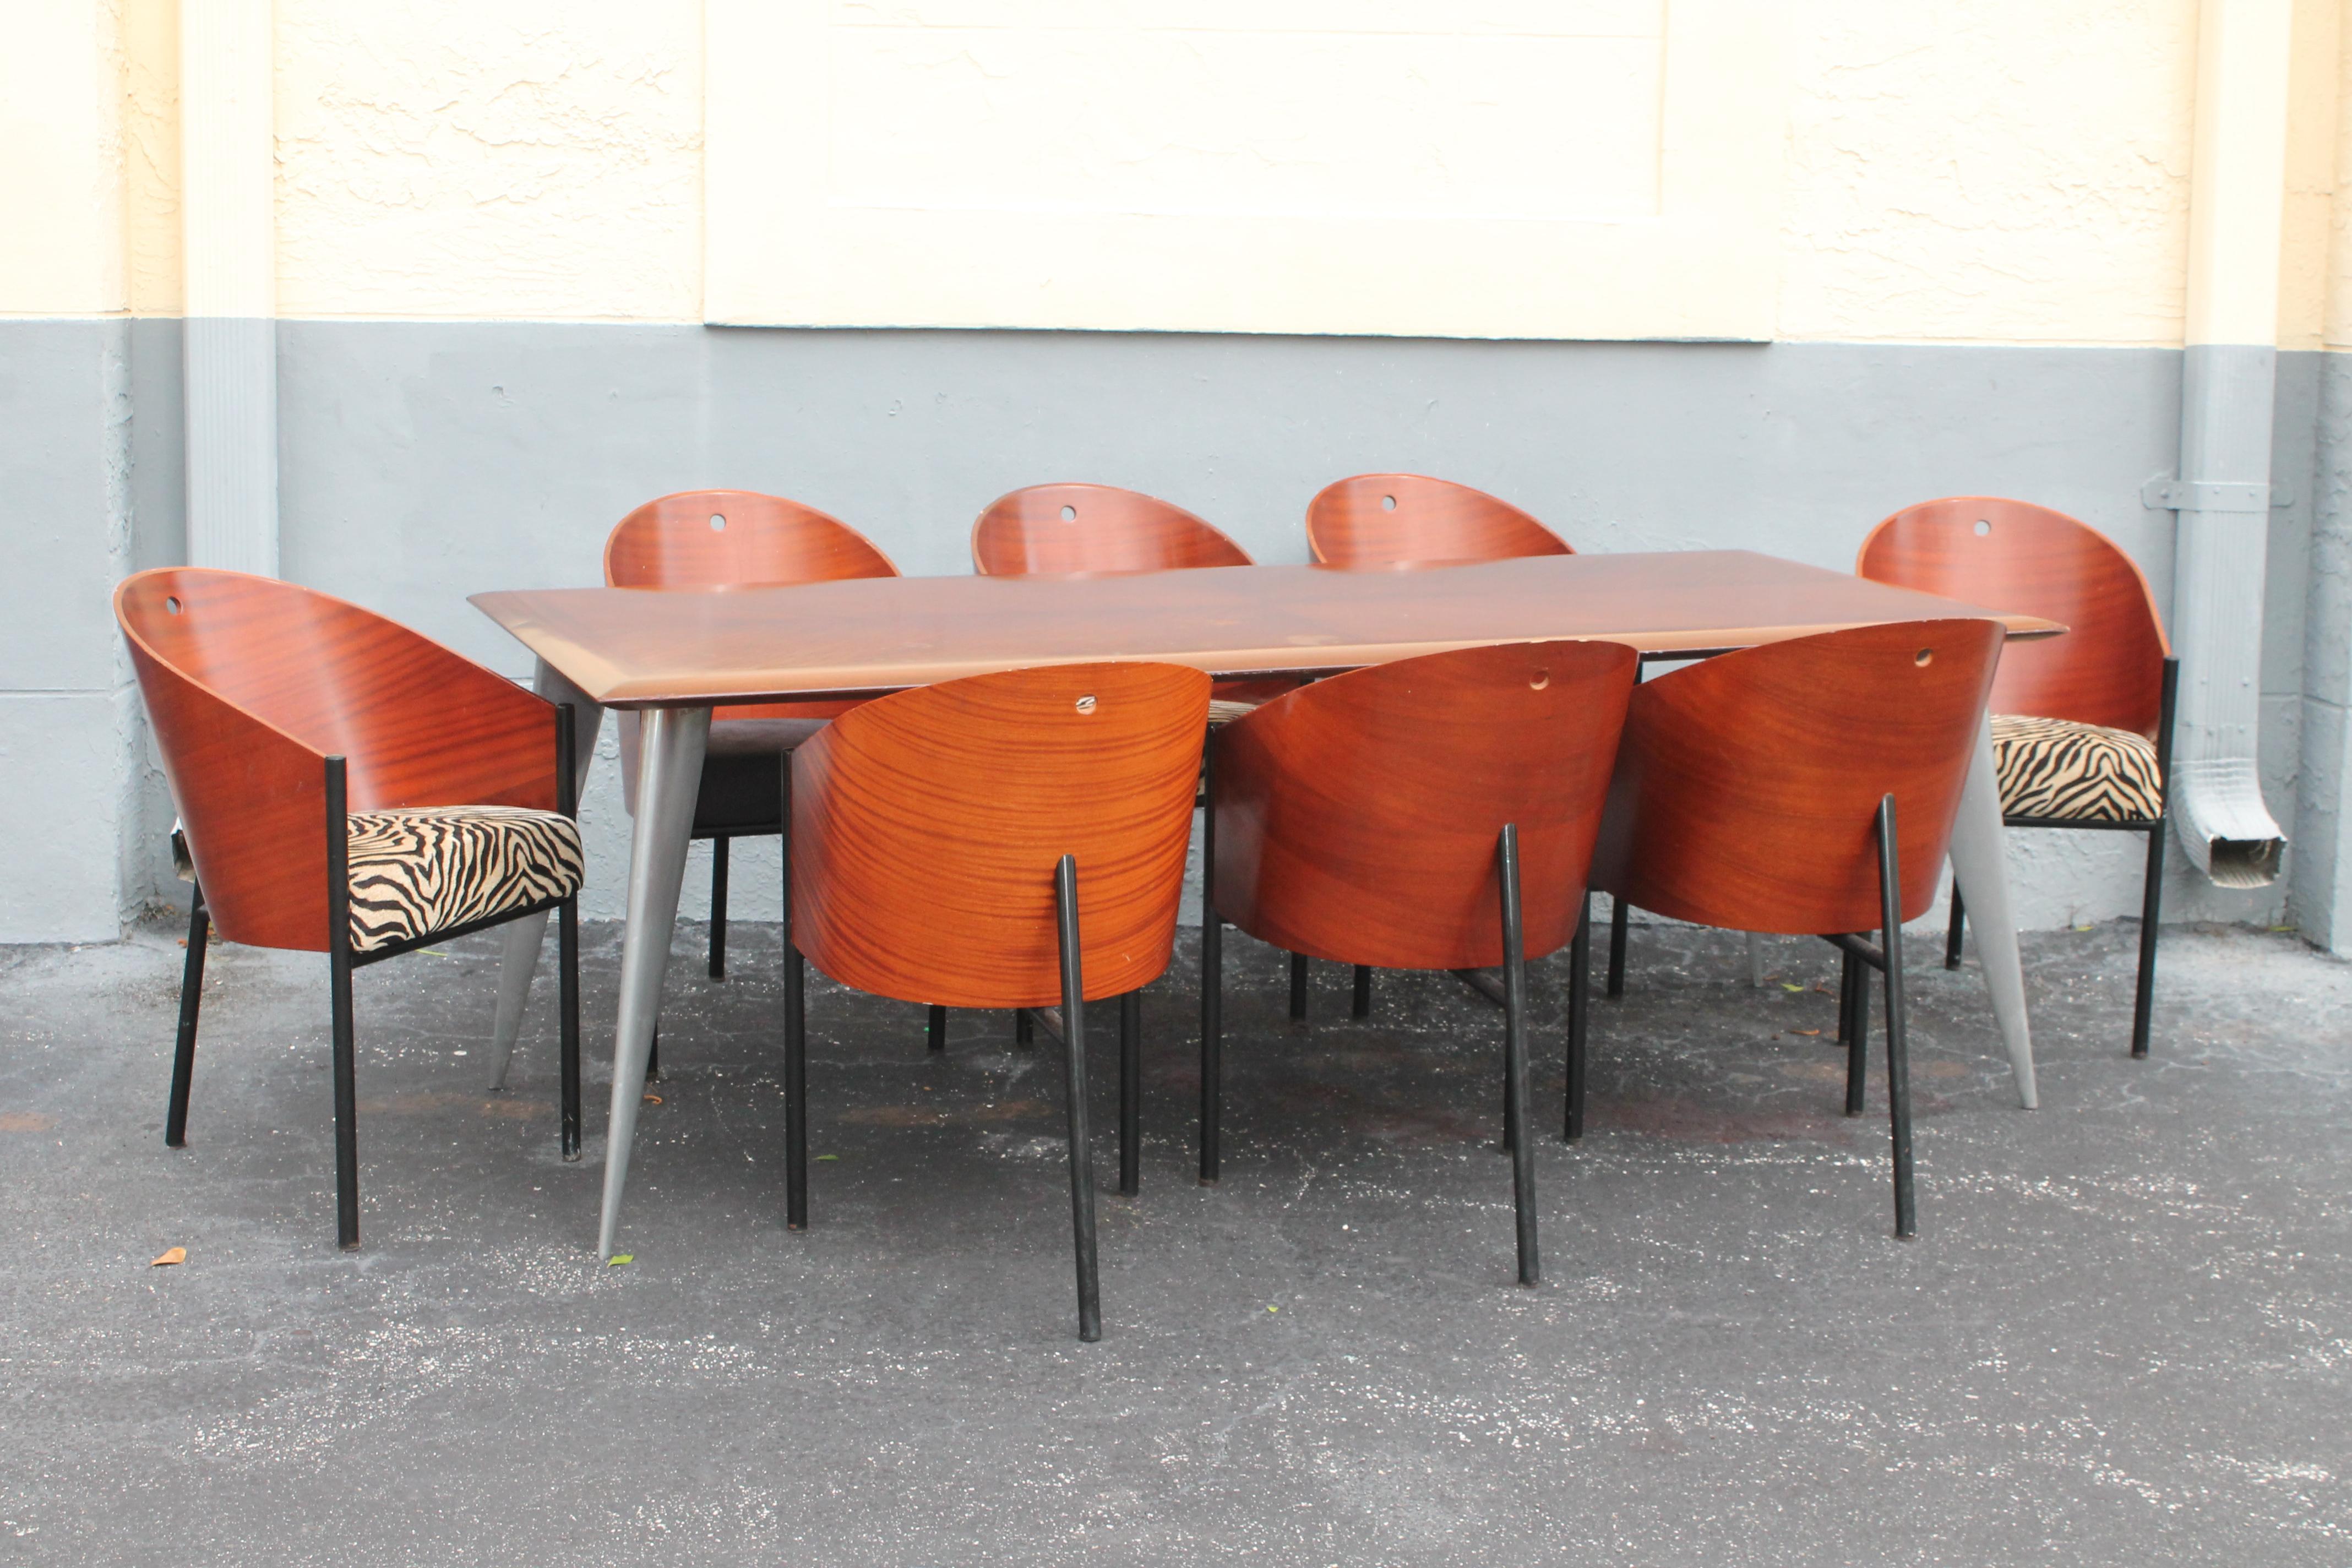 1980's Art Deco Inspired 9 Piece Dining Set Signed by the best! Philippe Starck. 8 chairs and one dining table included in this sale. I am going to let the pictures do the talking as they show exactly what this set is about. Dining table in